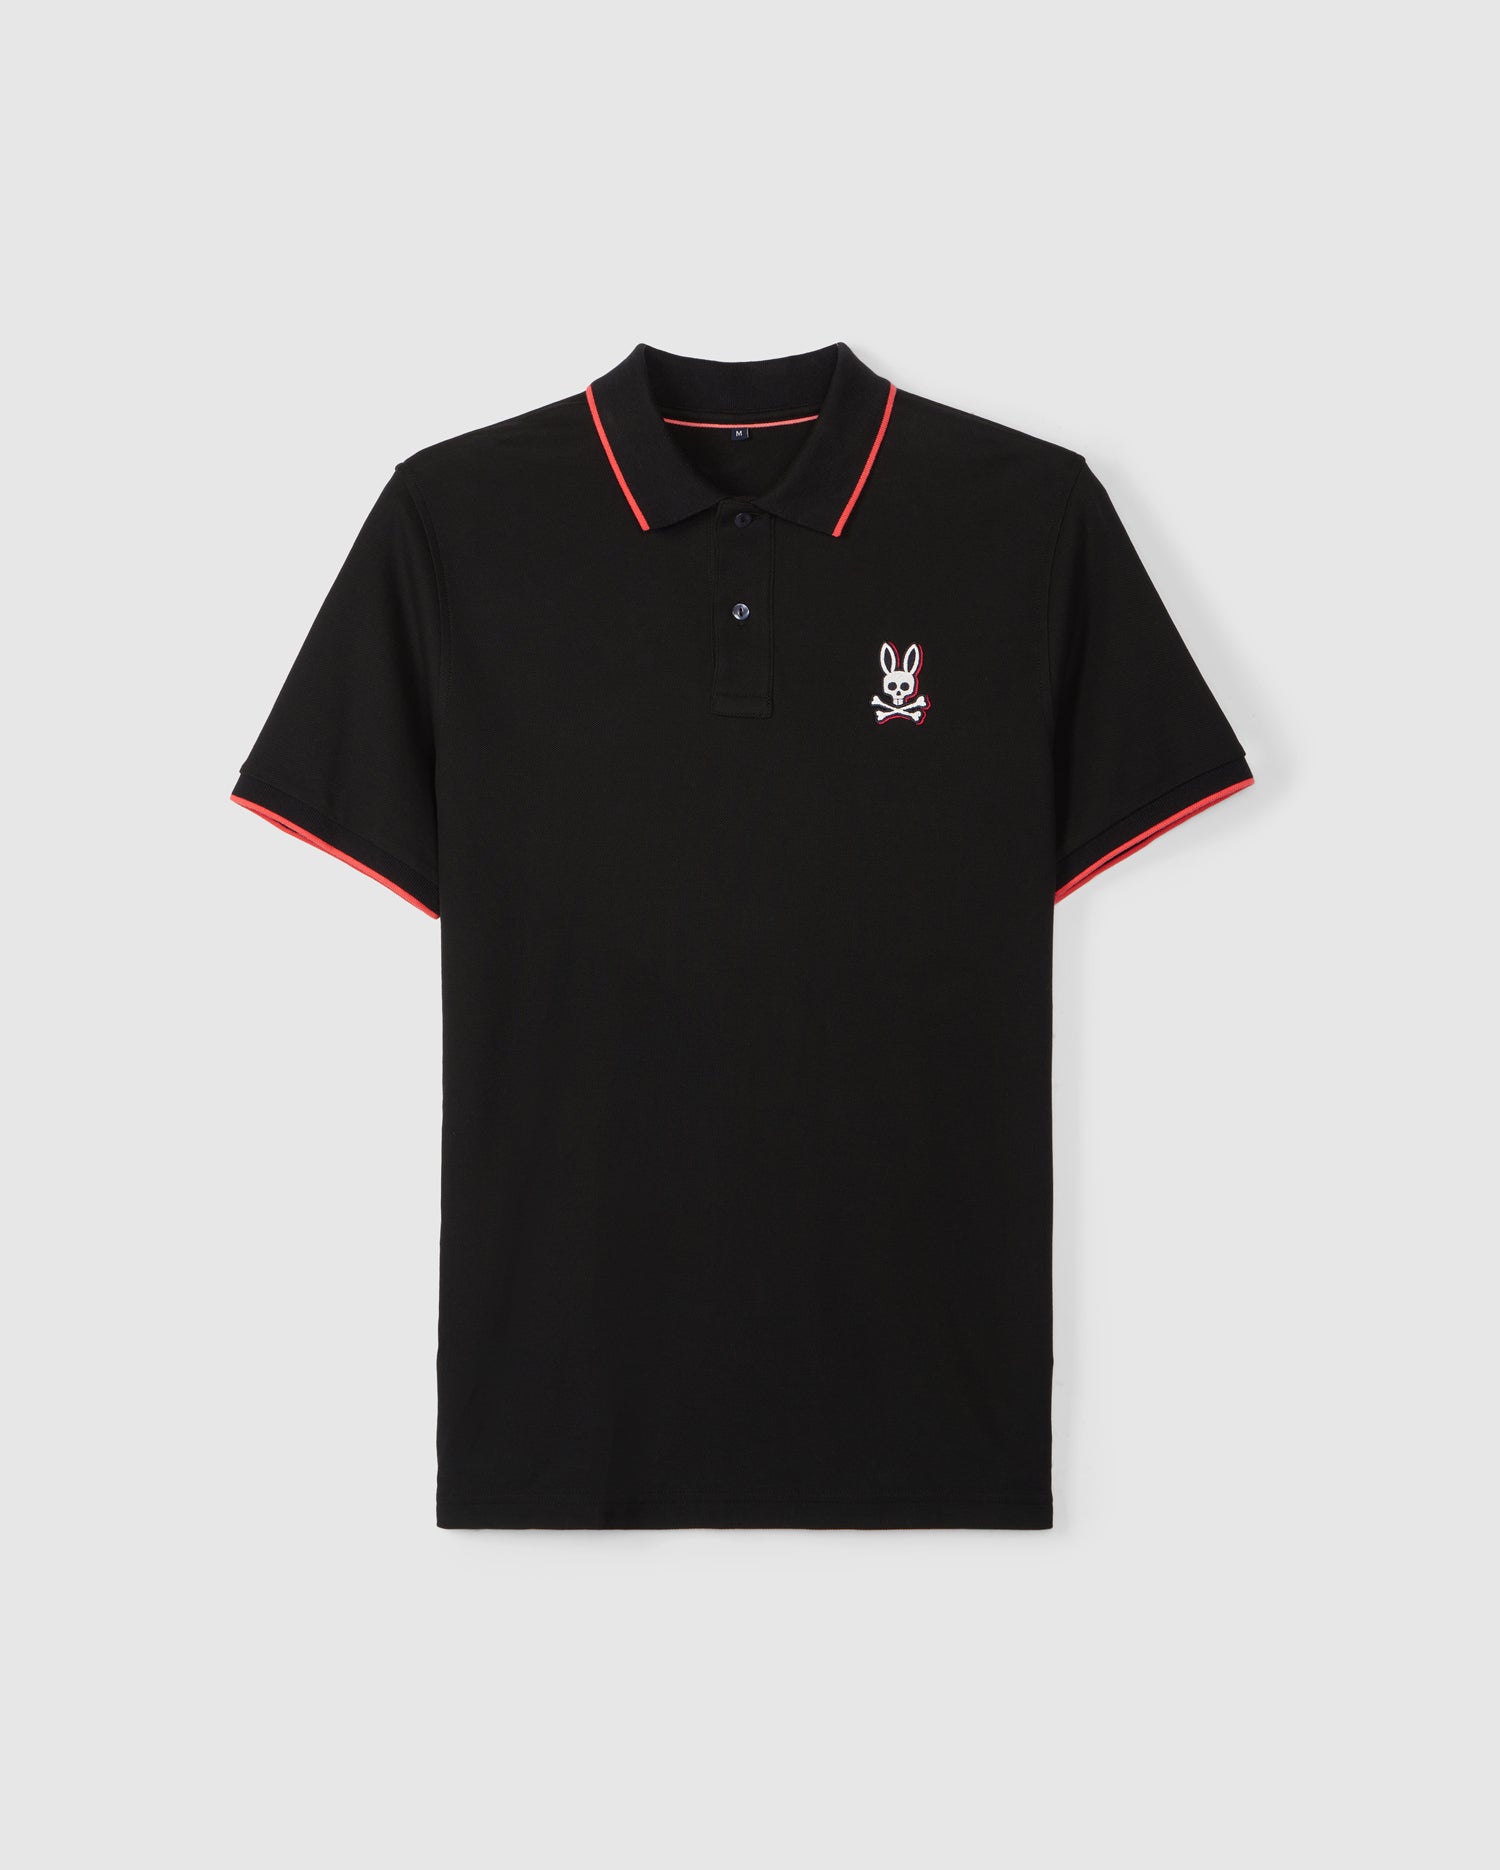 A black short-sleeve polo shirt crafted from Pima cotton piqué, featuring red trim on the sleeve cuffs and collar. It has a buttoned placket and an embroidered tonal Bunny logo with crossbones on the left chest. The MENS KAYDEN PIQUE POLO - B6K675C200 by Psycho Bunny is displayed against a plain white background.